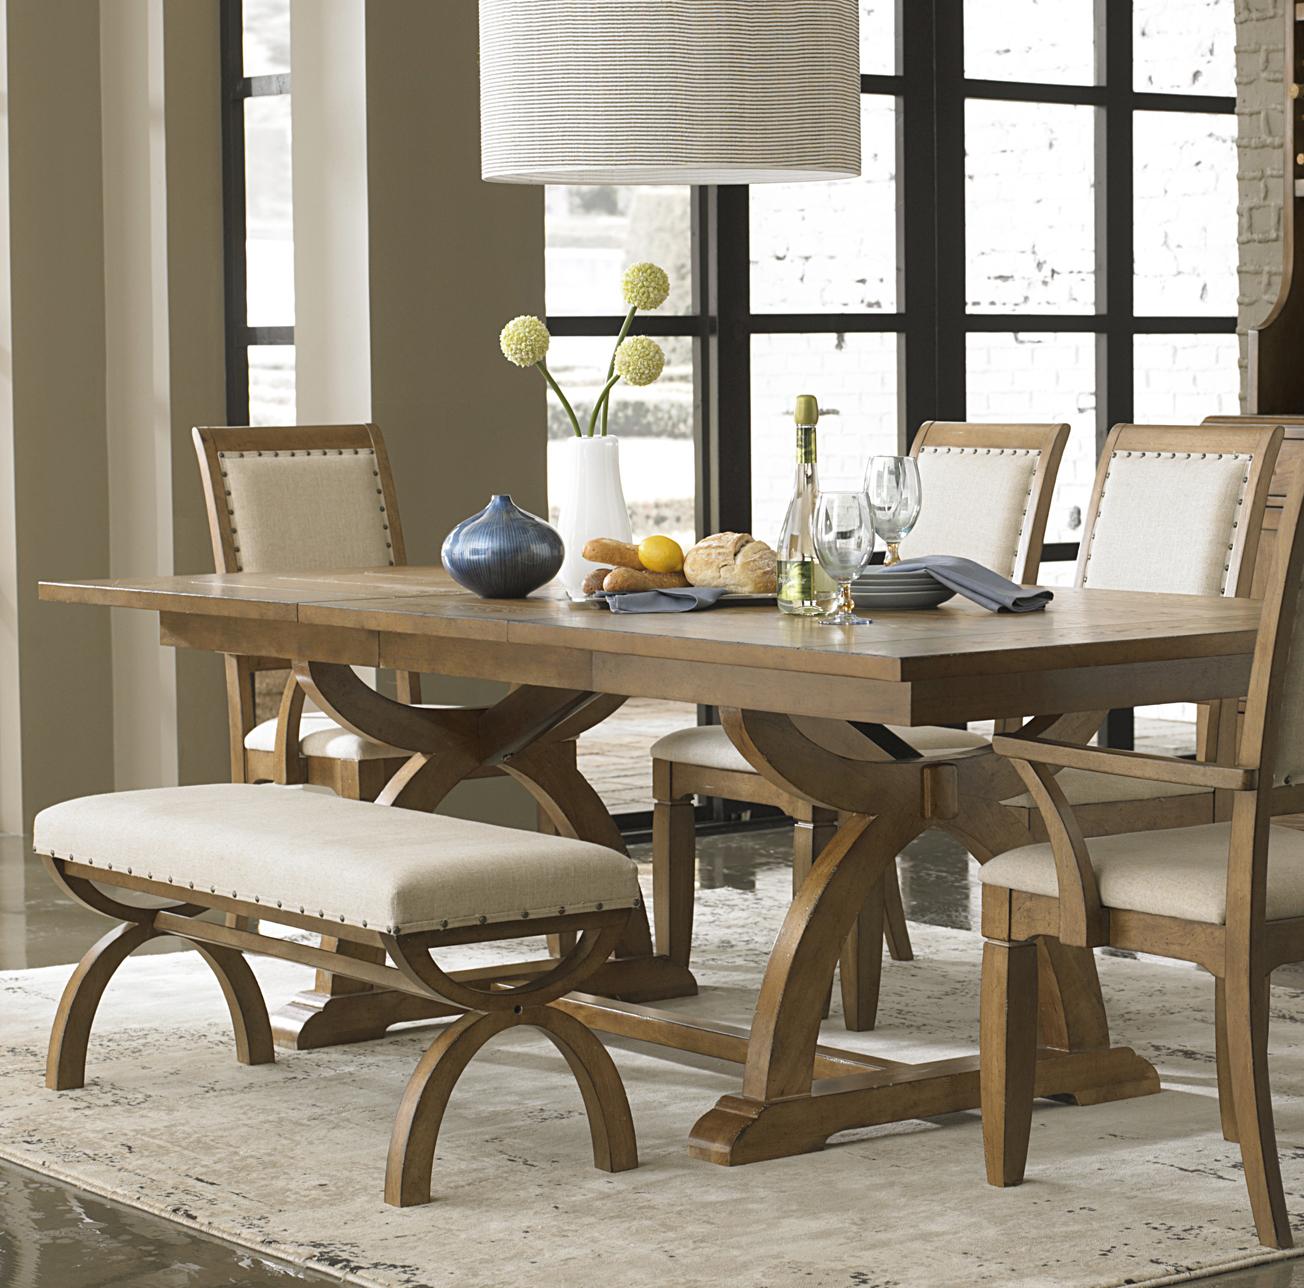 Dining Room Table with Bench Seat – HomesFeed